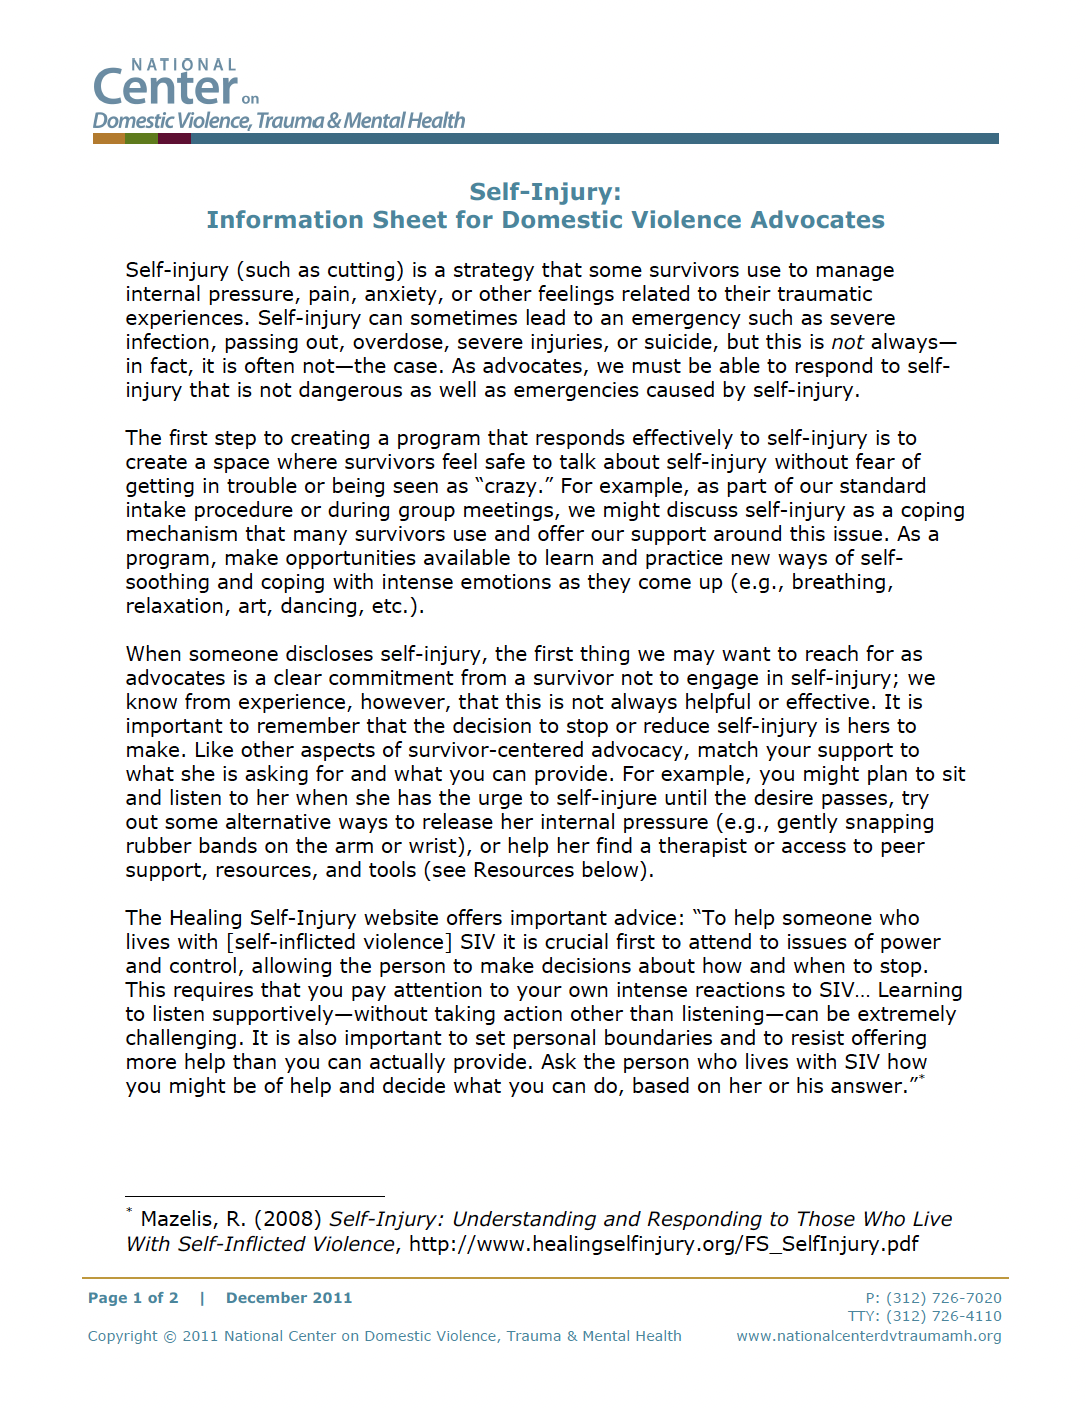 This document is an information sheet for domestic violence advocates about self-injury and how to respond to survivors who engage in self-injurious behaviors.